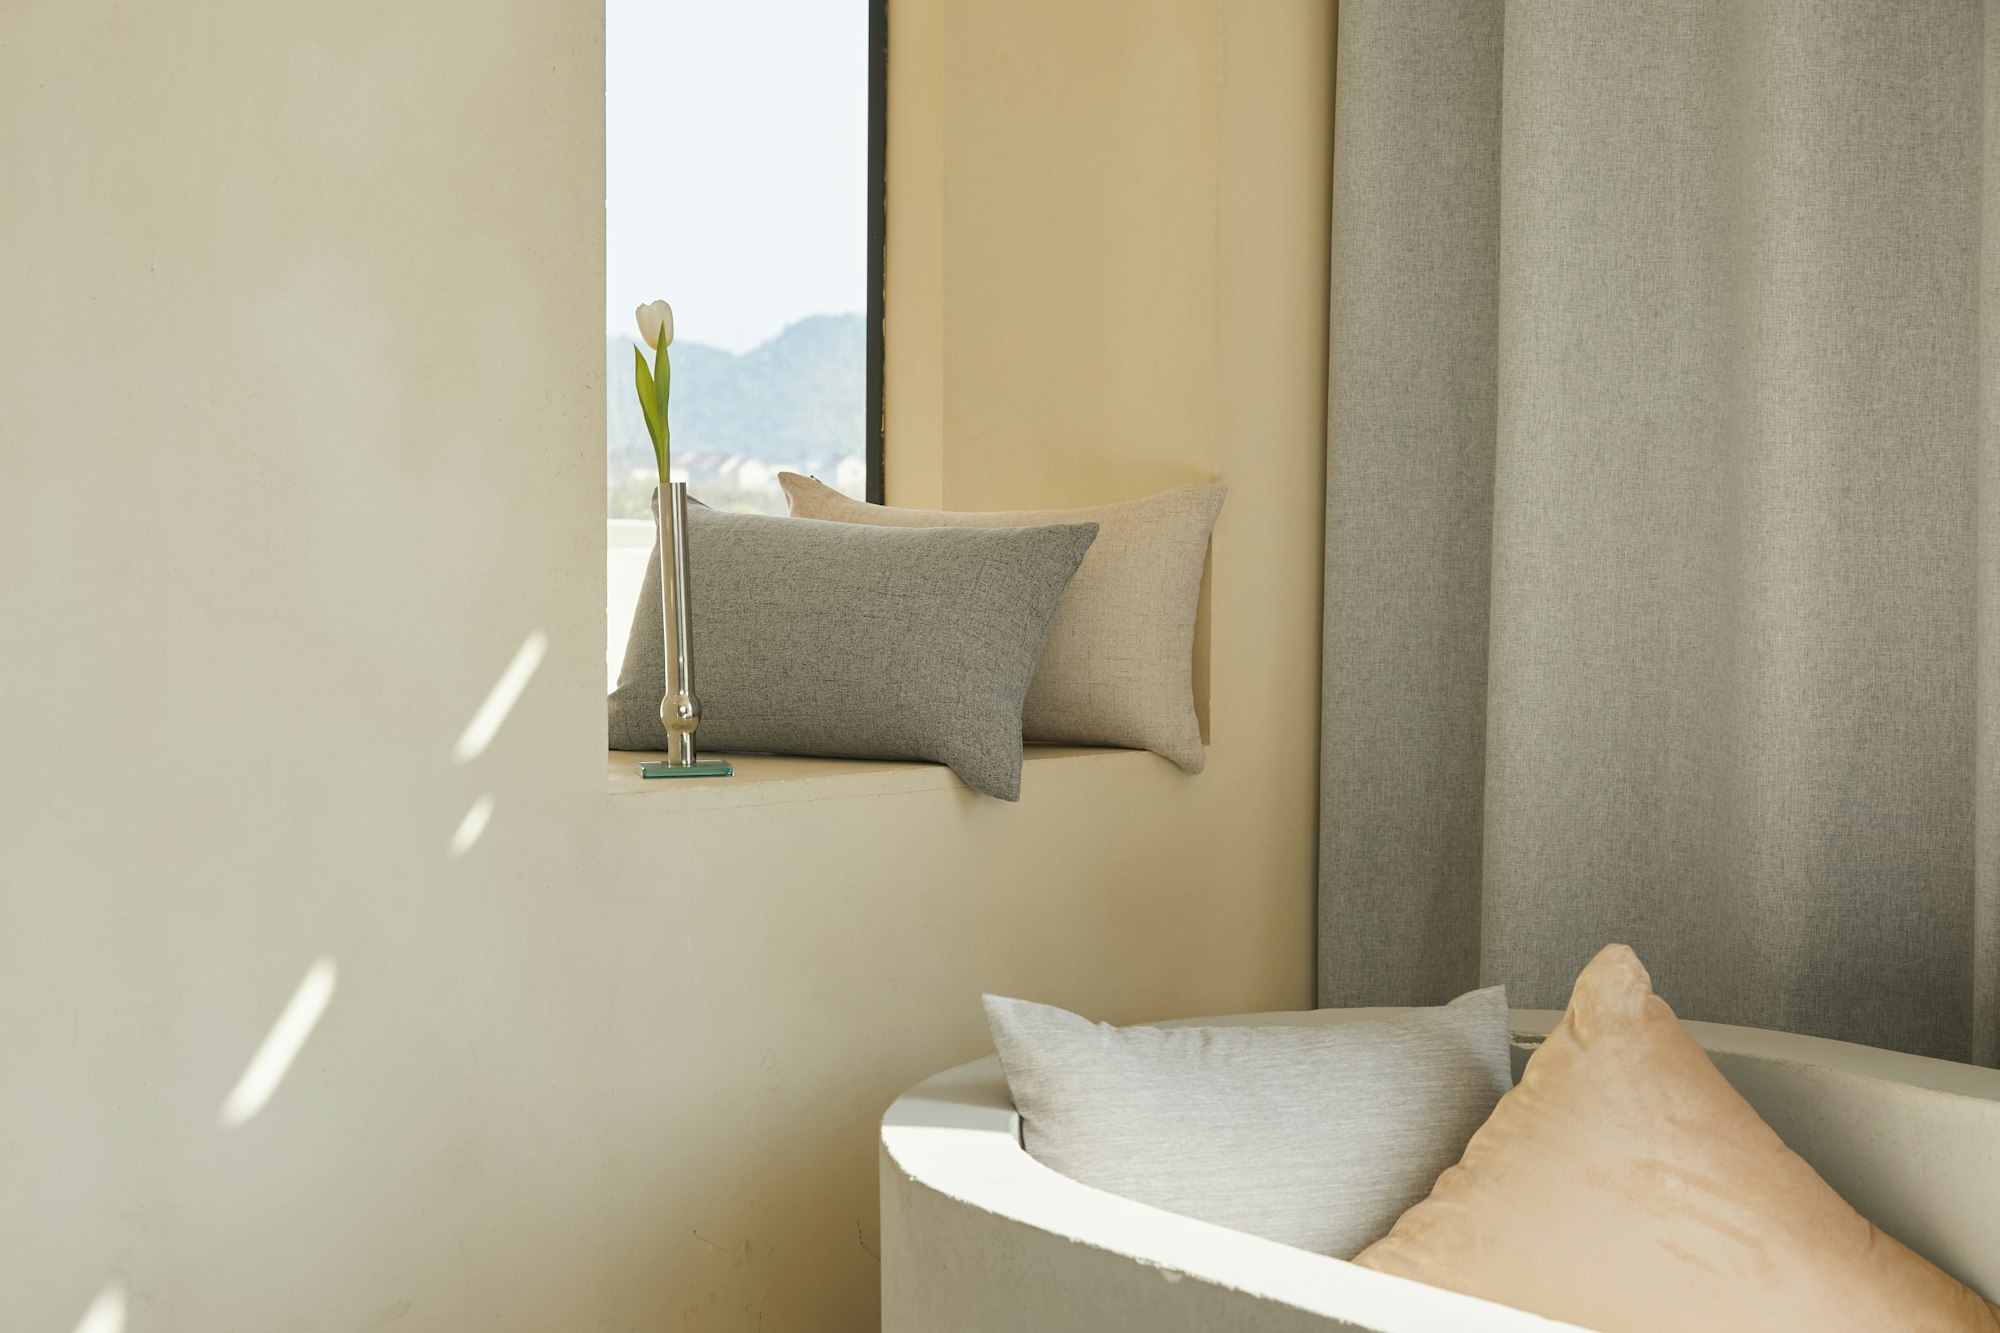 cream colored cushions next to a pastel orange wall